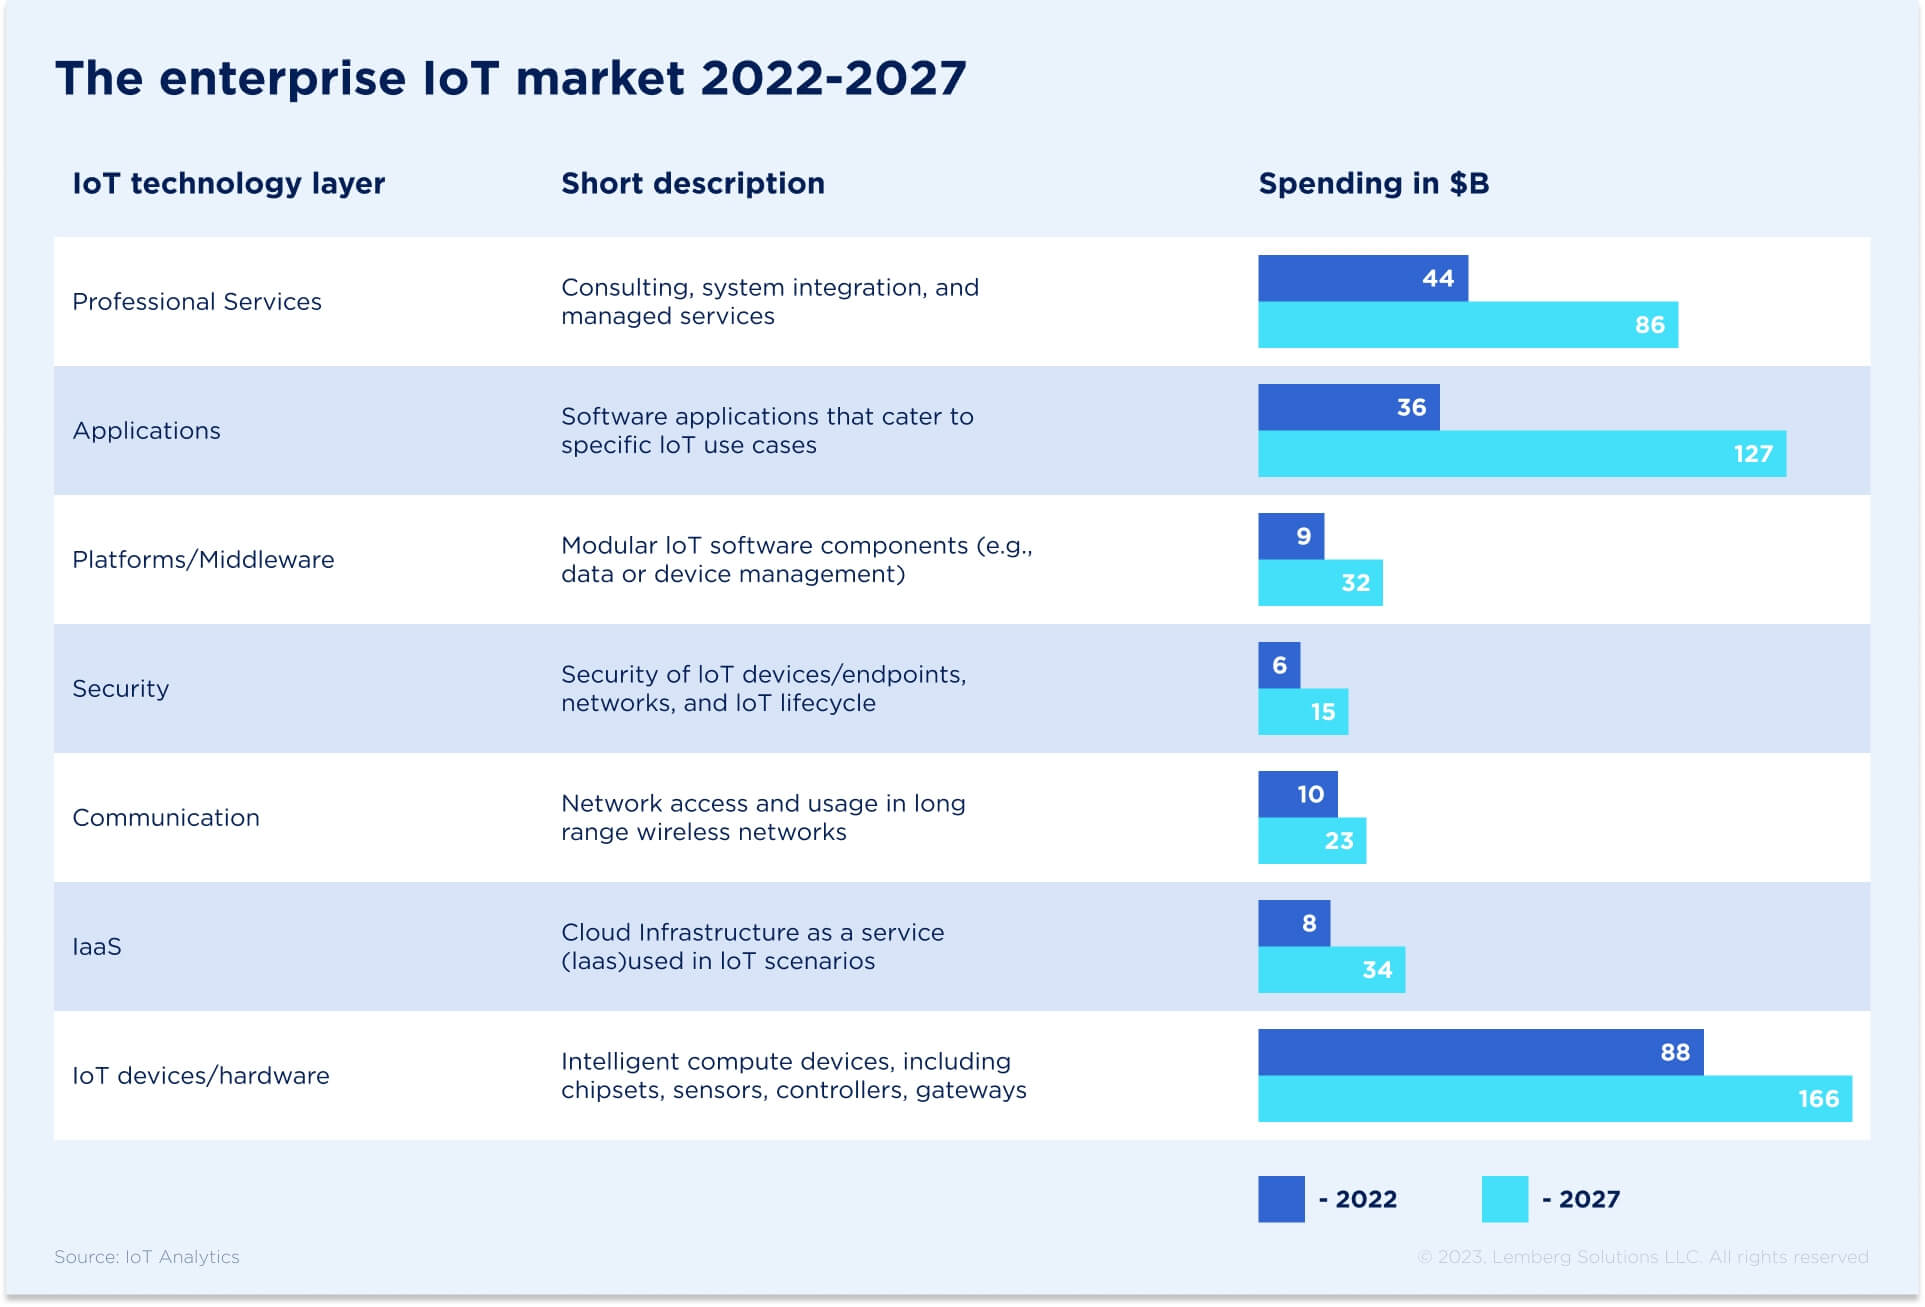 Enterprise IoT Real Use Cases and Market Overview - 2022-2027 Lemberg Solutions